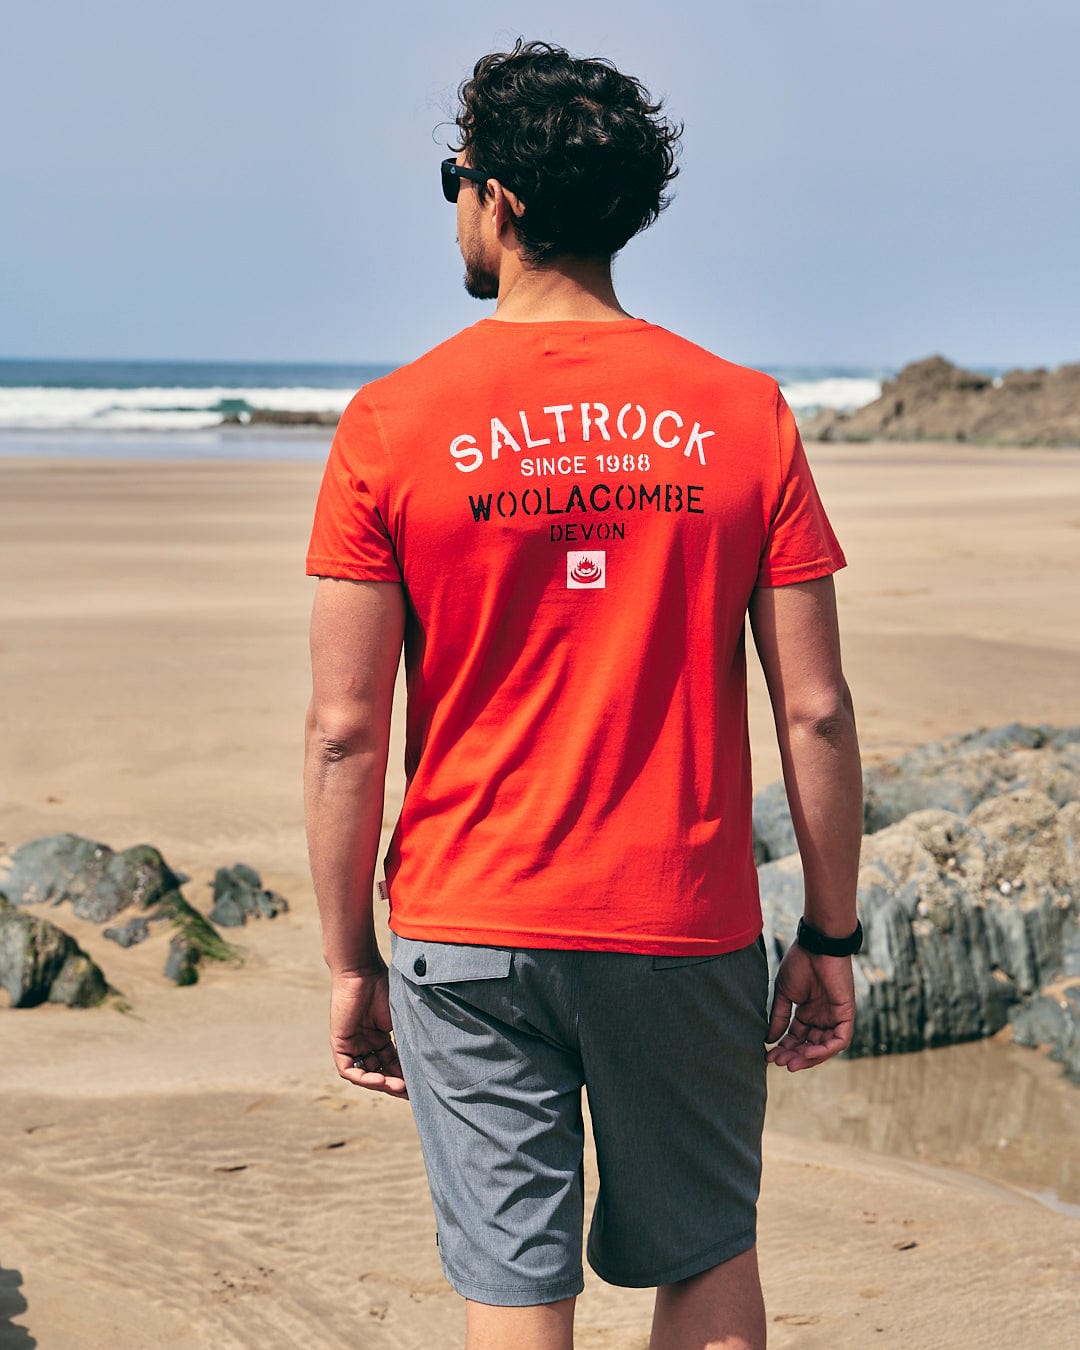 A man walking on the beach wearing a Saltrock Stencil - Mens Location T-Shirt - Woolacombe - Red.